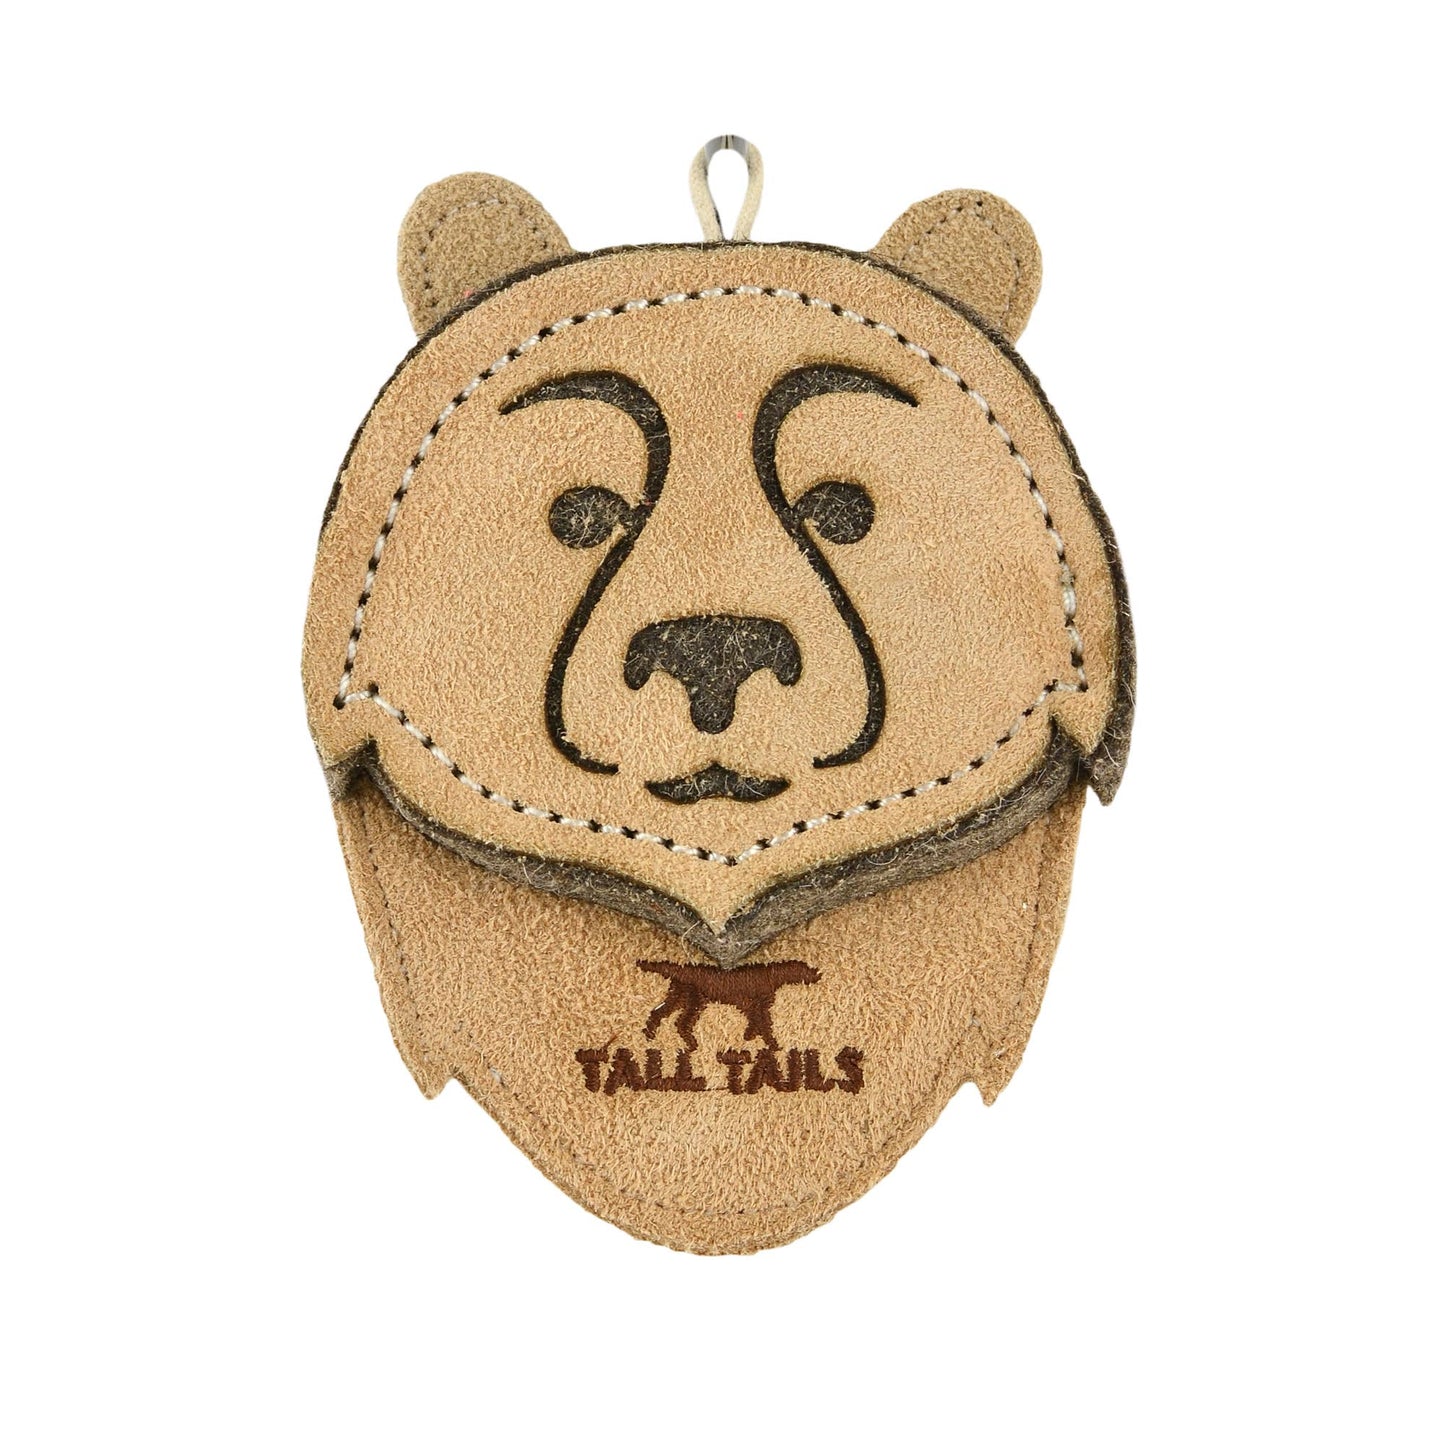 Tall Tails Natural Leather Bear Dog Toy - 4"